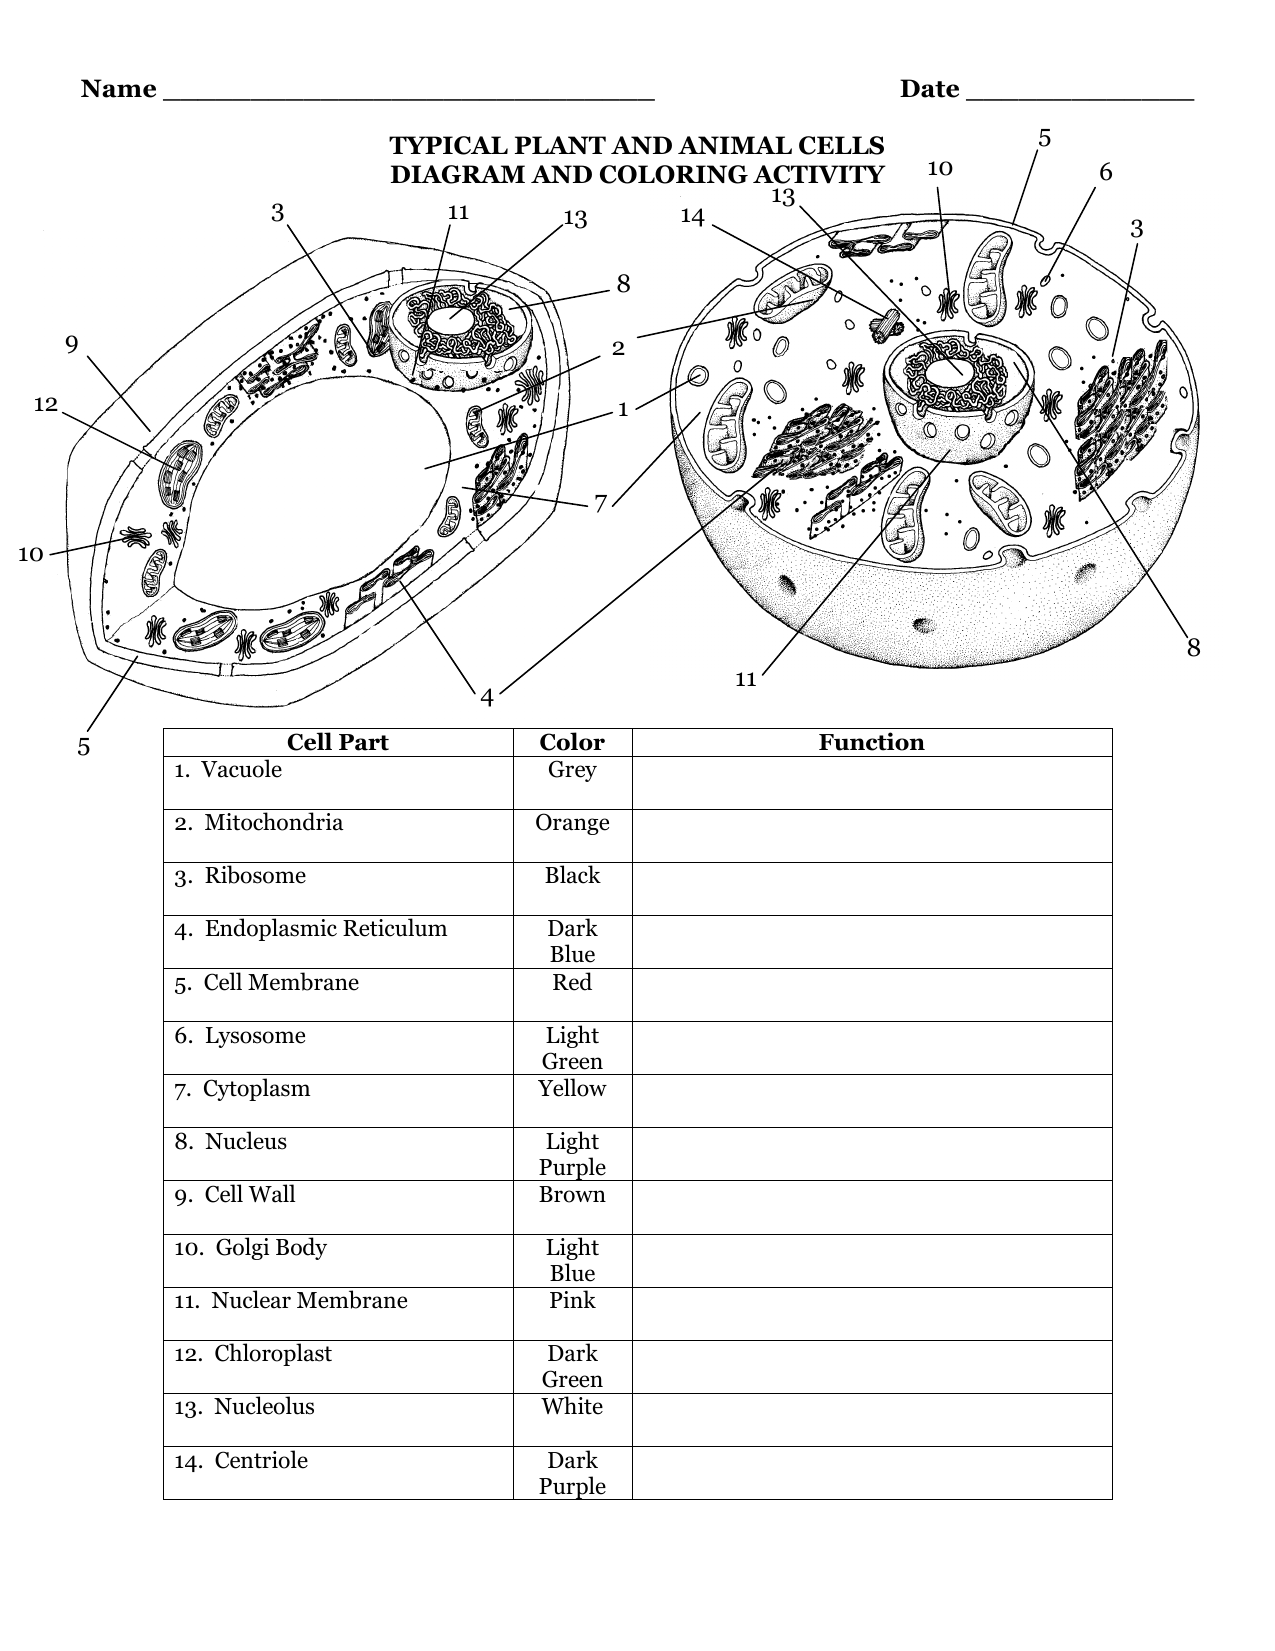 TYPICAL PLANT AND ANIMAL CELLS DIAGRAM AND COLORING Within Animal Cell Worksheet Answers